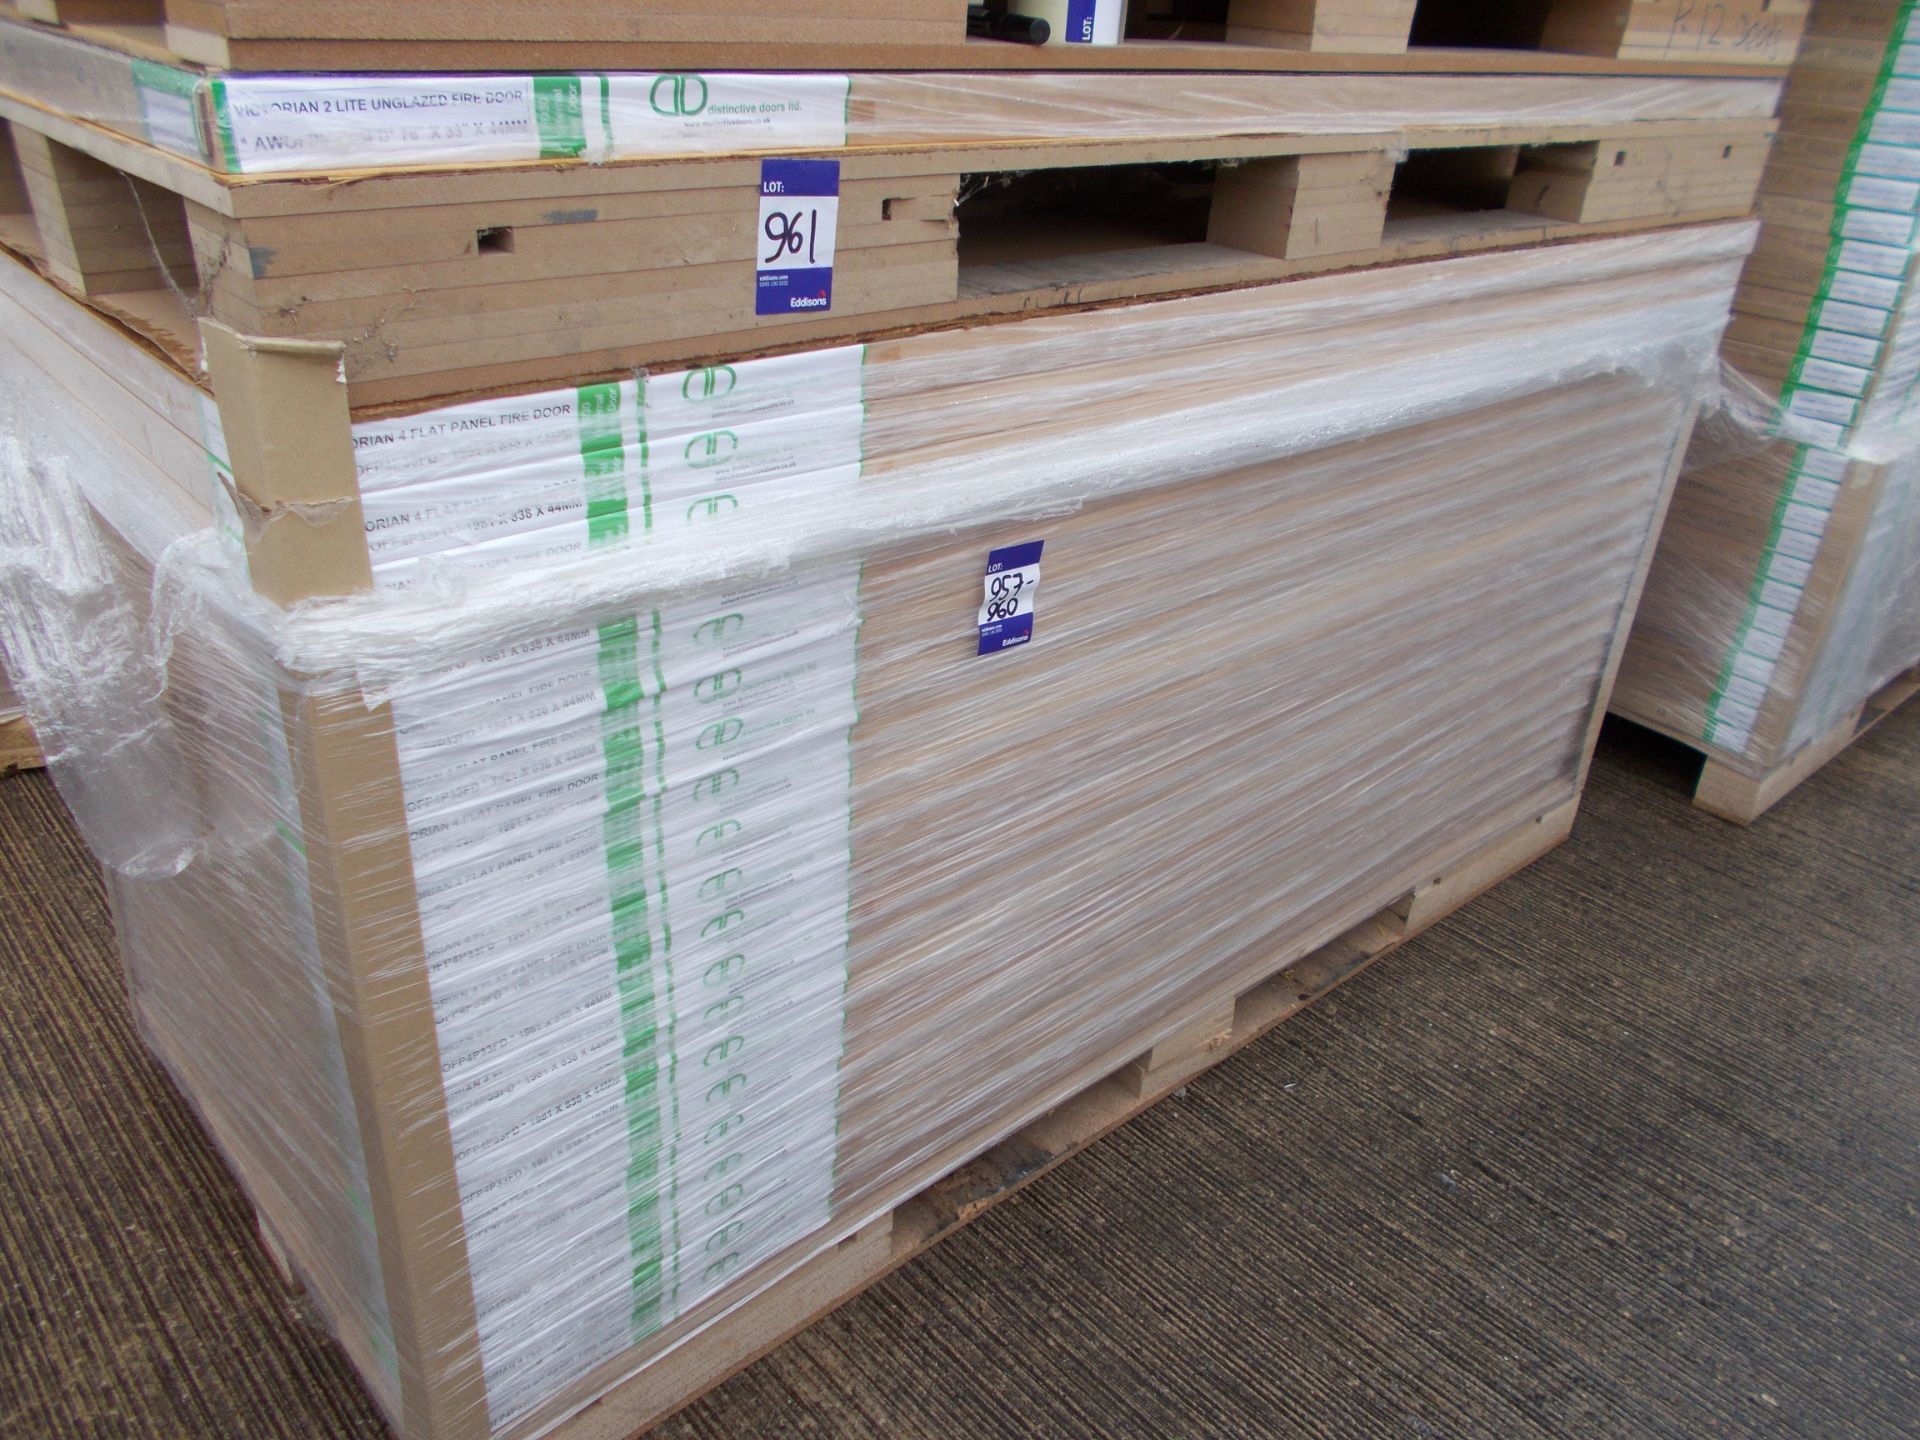 5 x Victorian 4 Flat Panel Int Fire Door AWOFP4P33FD, 1981x838x44mm - Lots to be handed out in order - Image 2 of 3